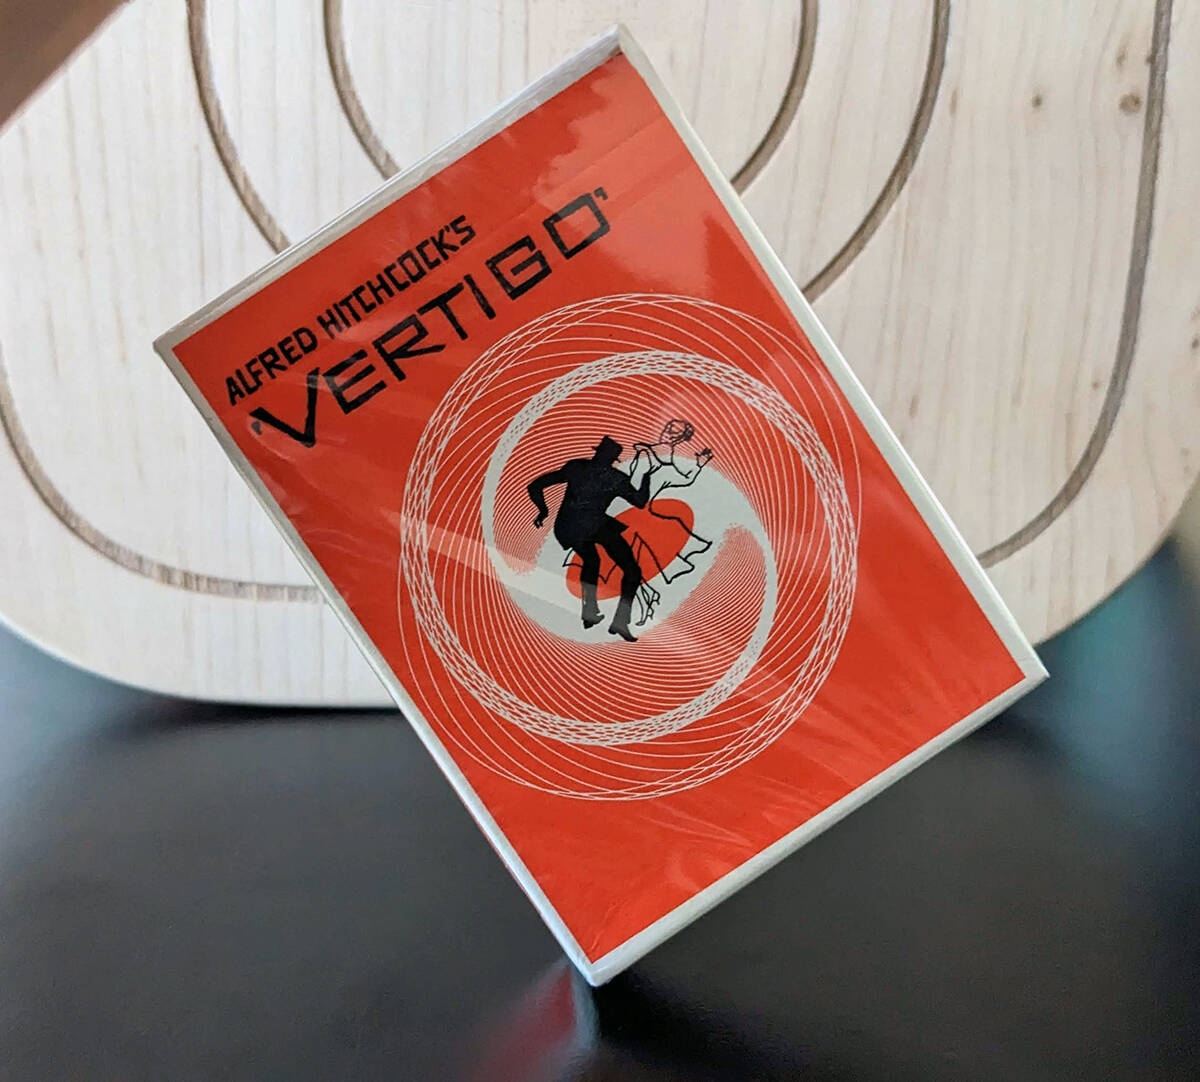 The Vertigo deck, by Art of Play, paying tribute to Alfred Hitchcock's work of the same name.